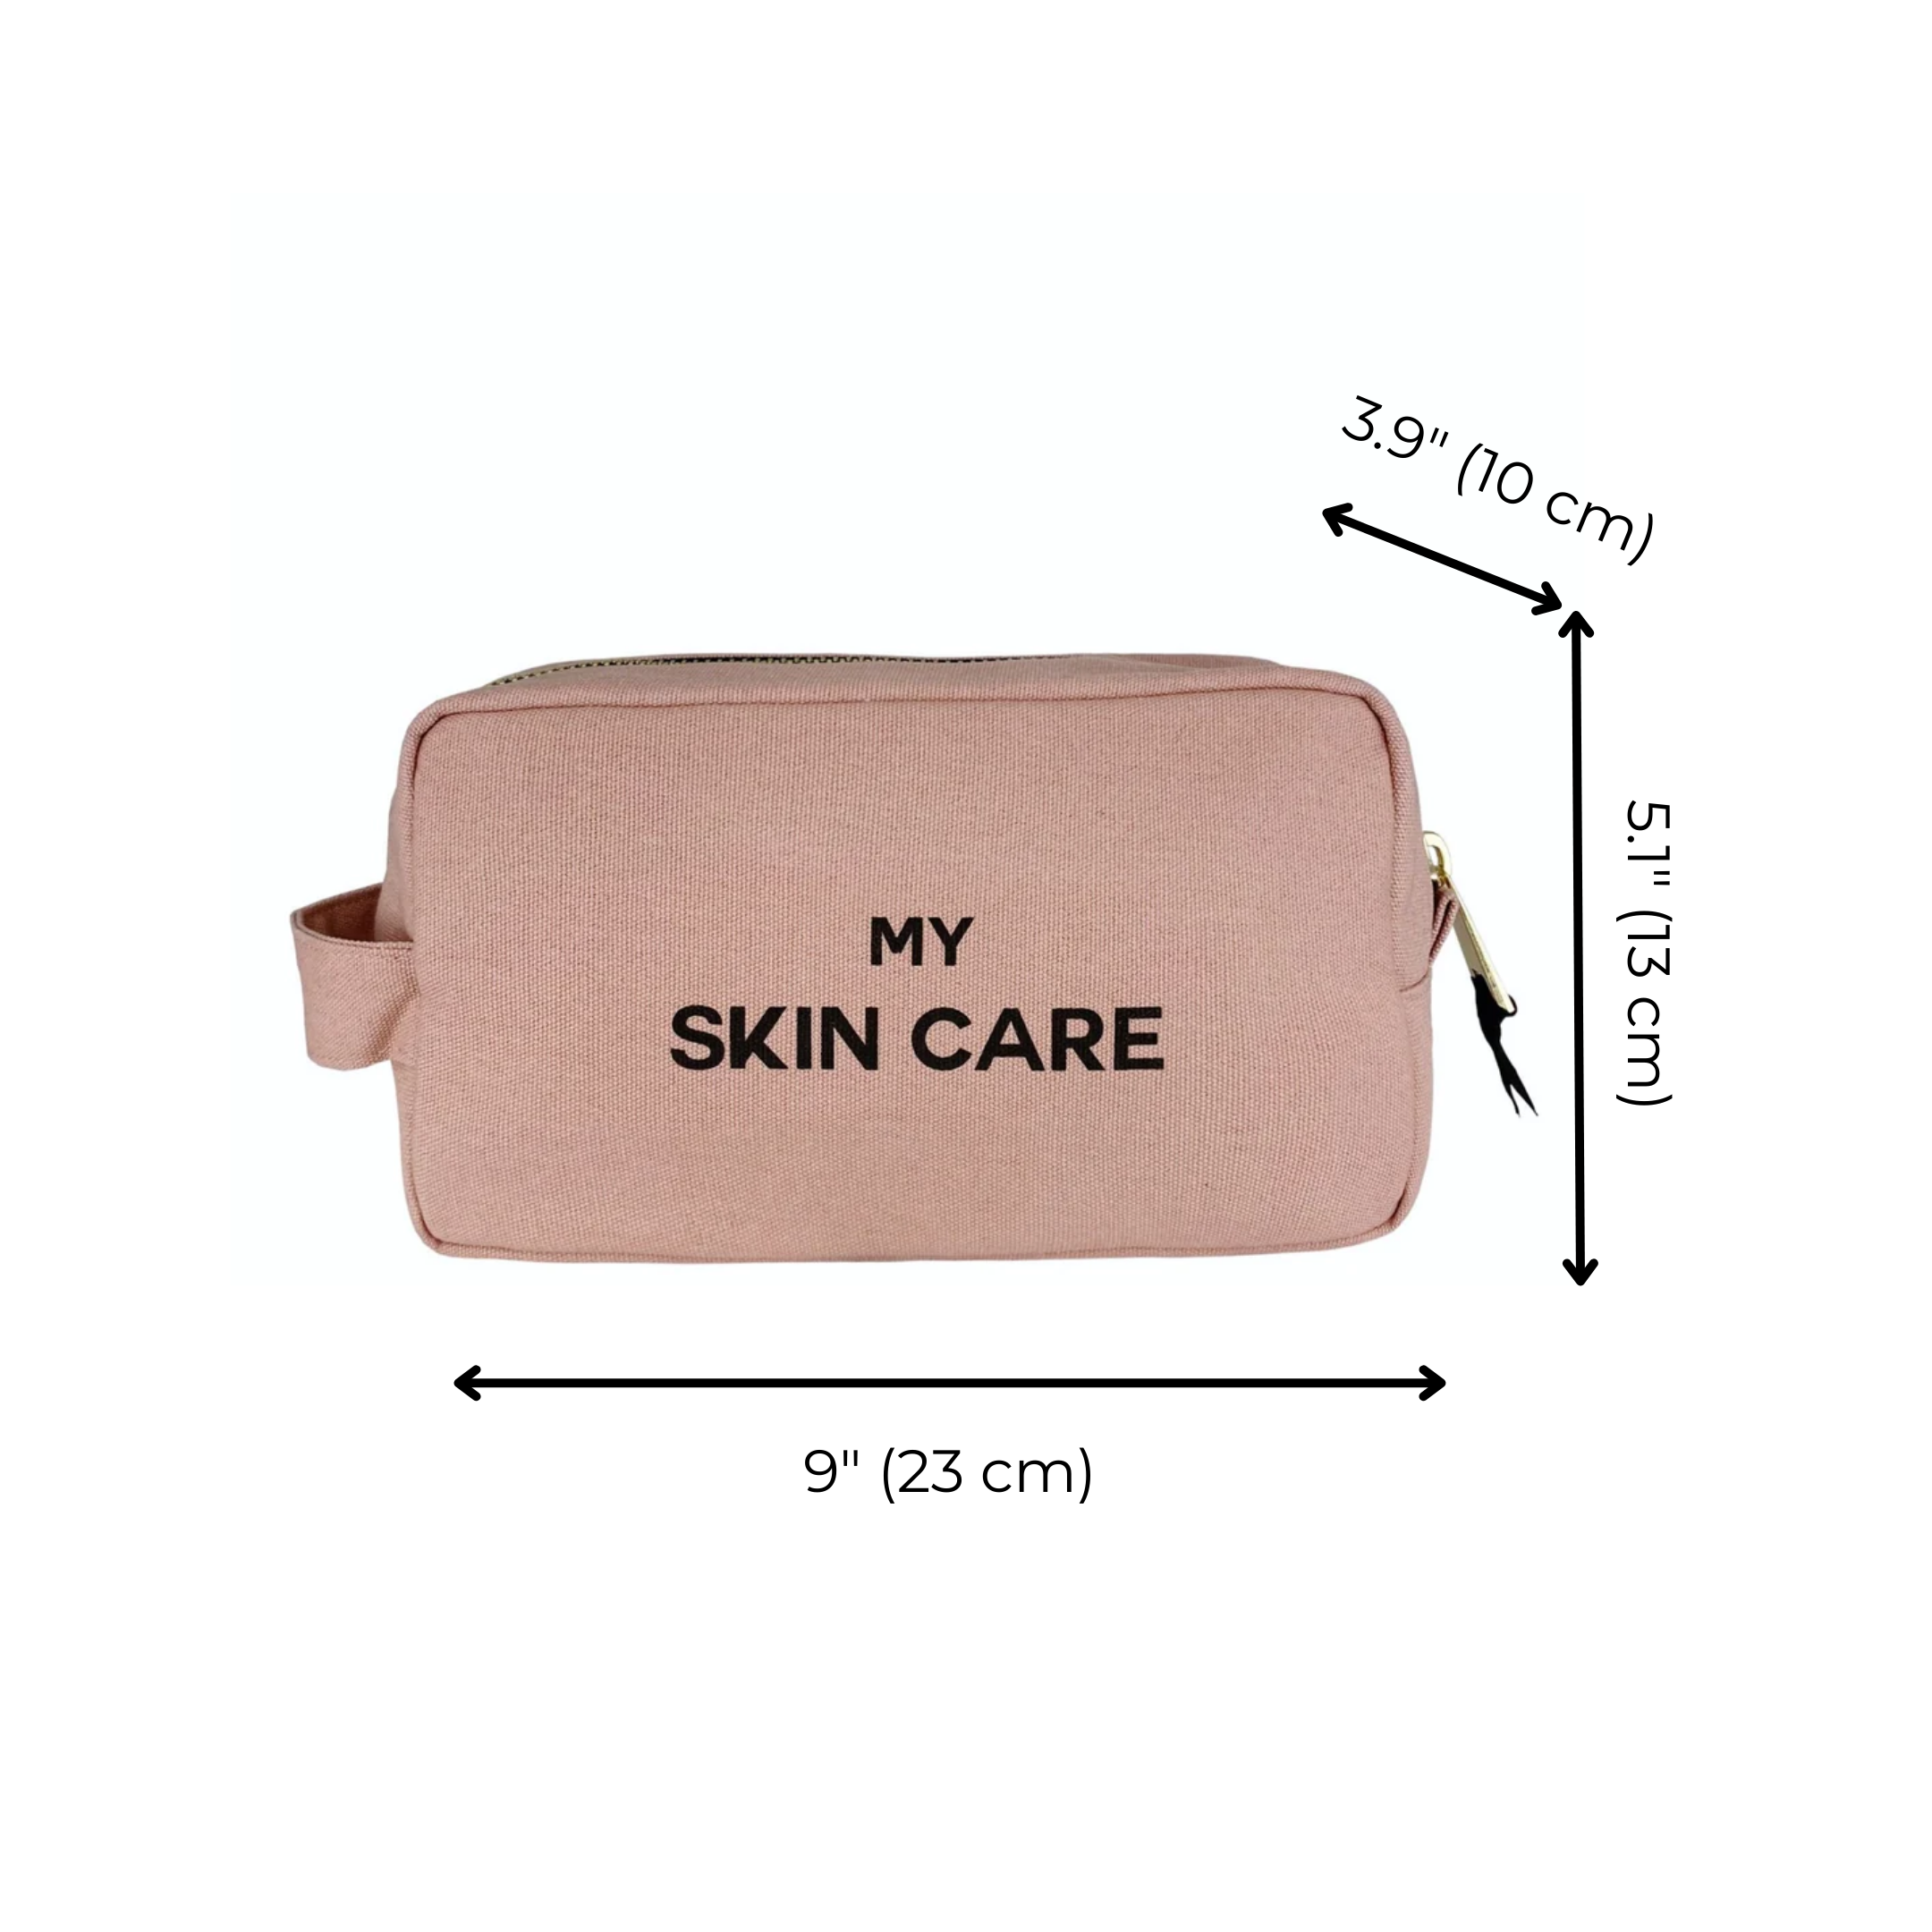 My Skin Care - Organizing Pouch, Pink/Blush | Bag-all